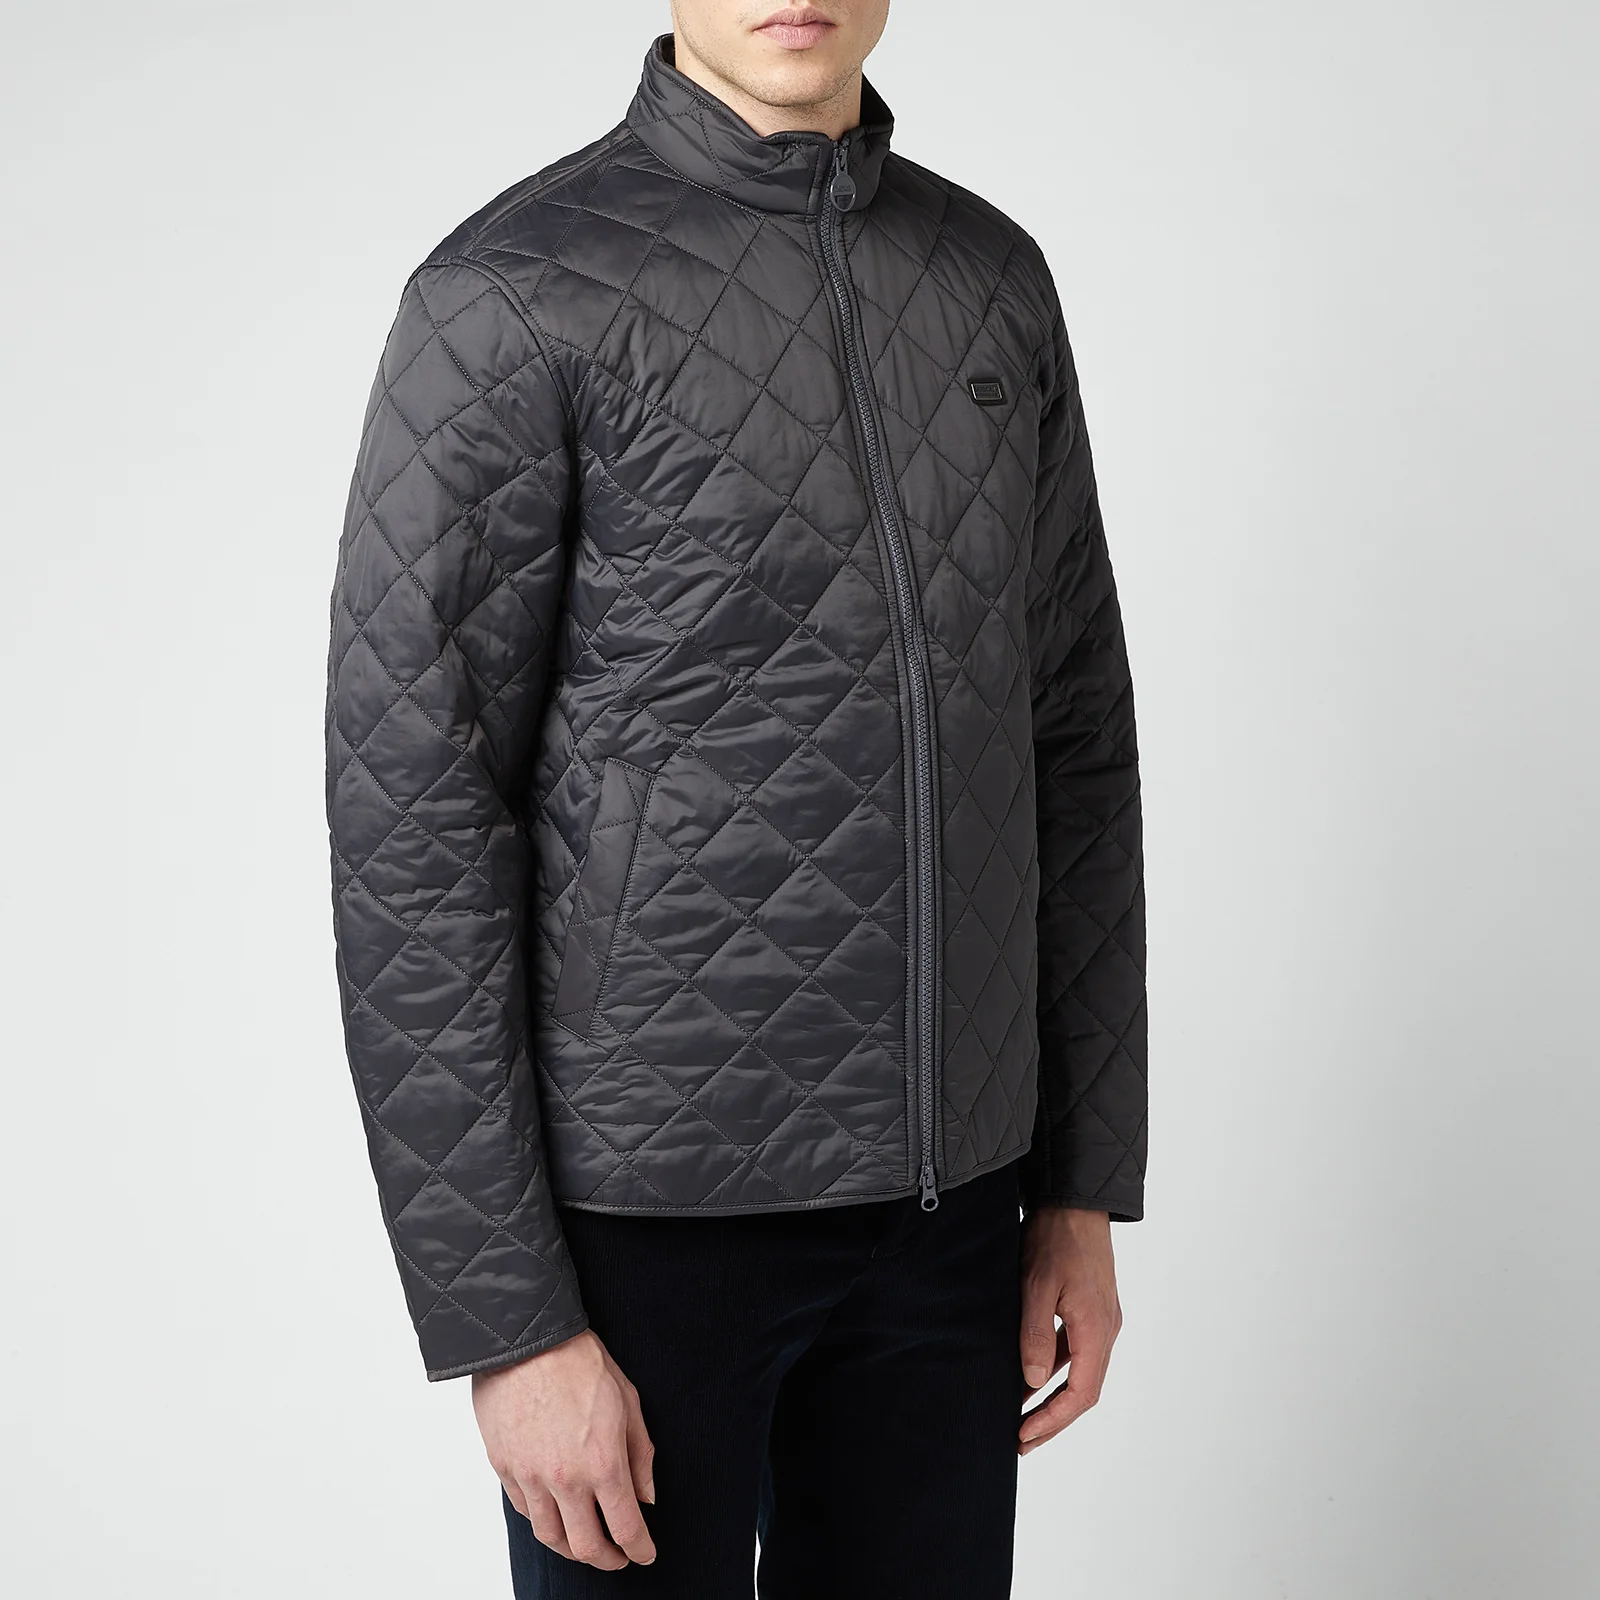 Barbour International Men's Gear Quilted Jacket - Charcoal Image 1